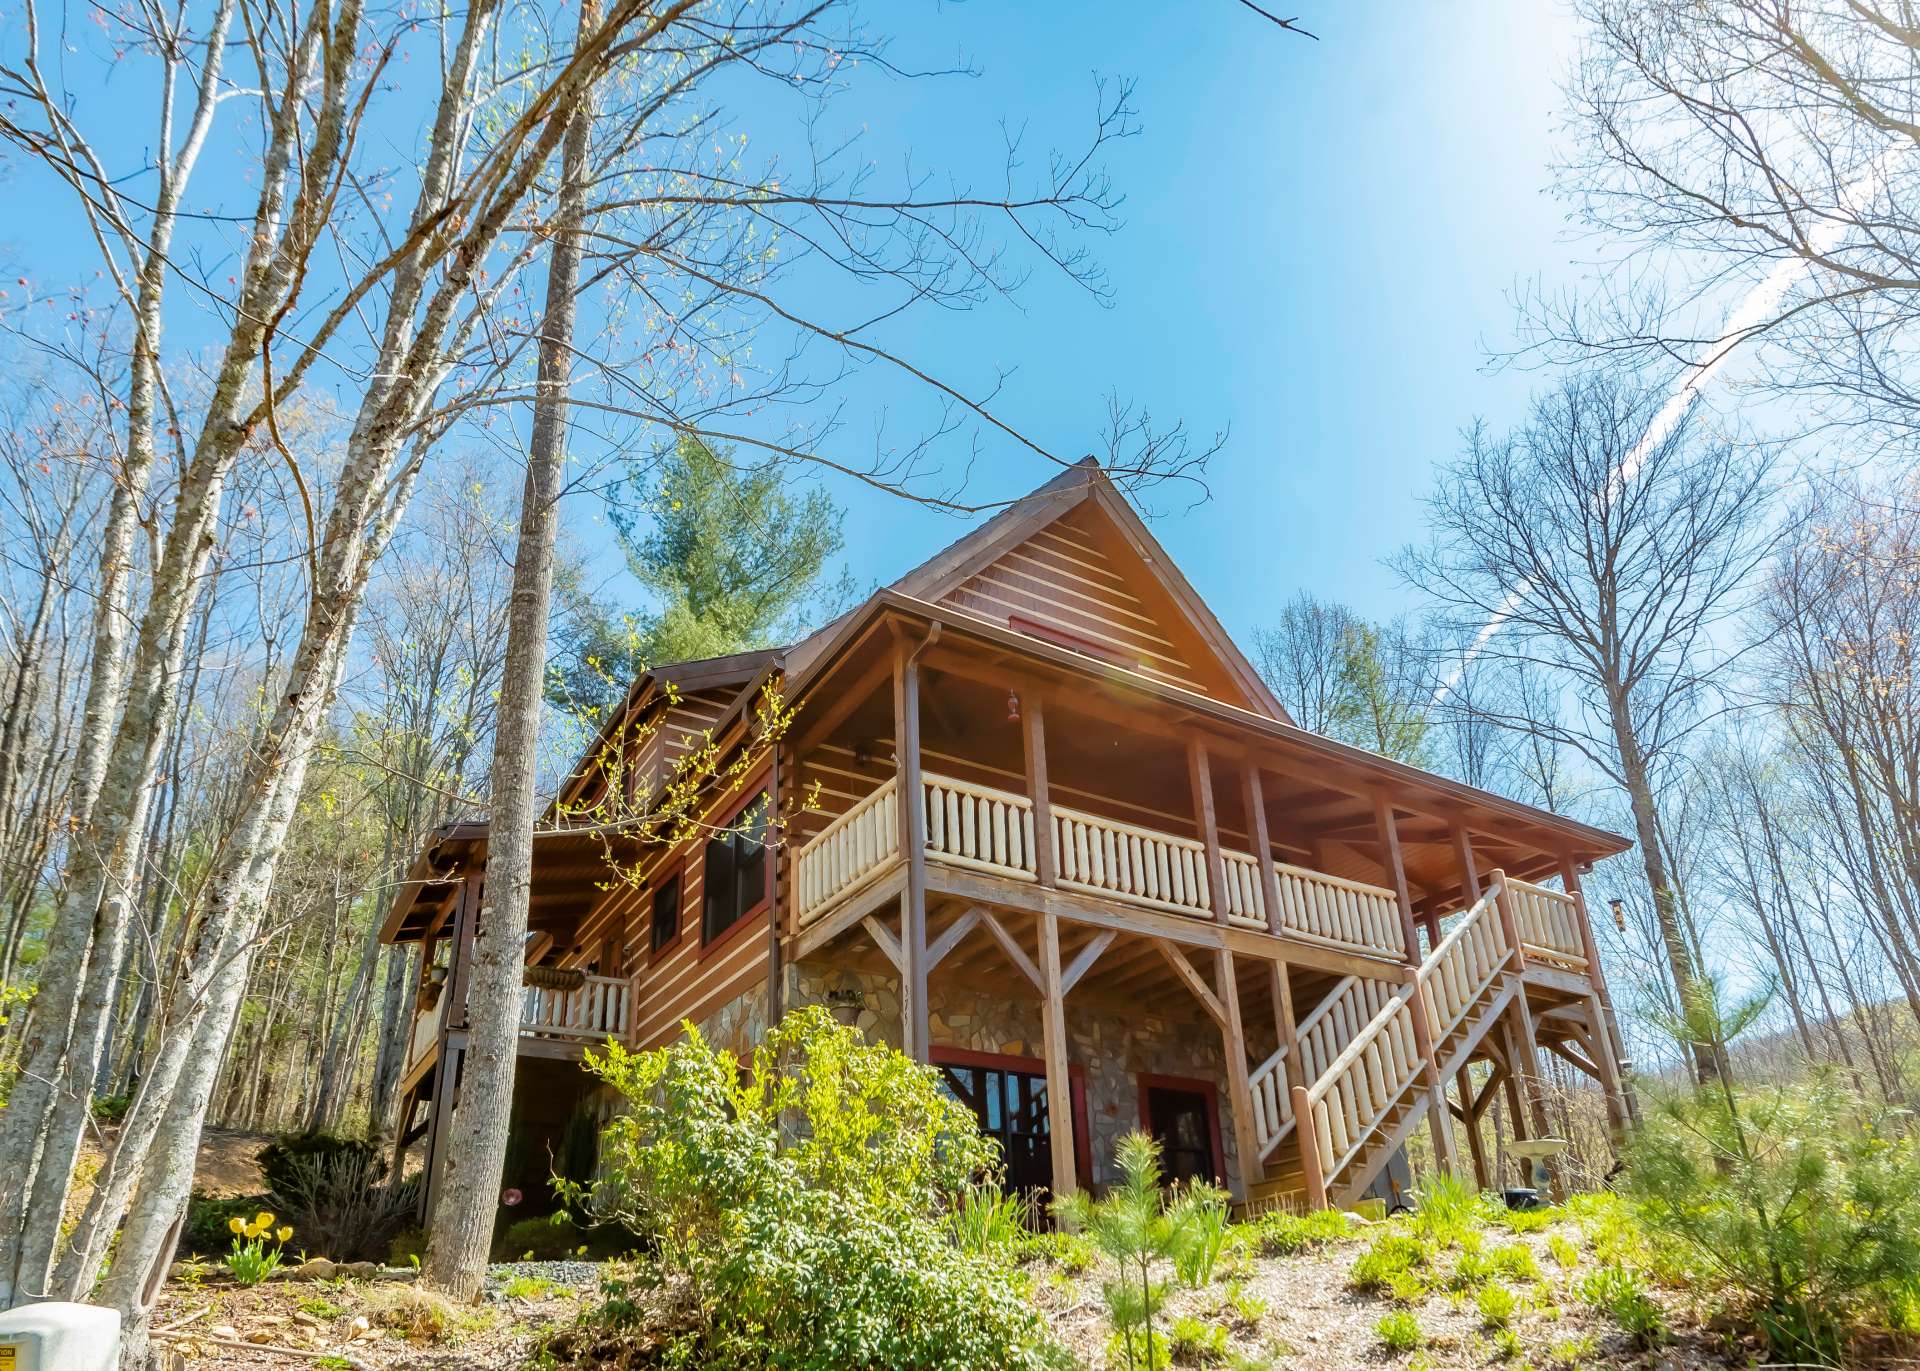 The location is convenient to both Boone and West Jefferson, as well as many NC High Country destinations.